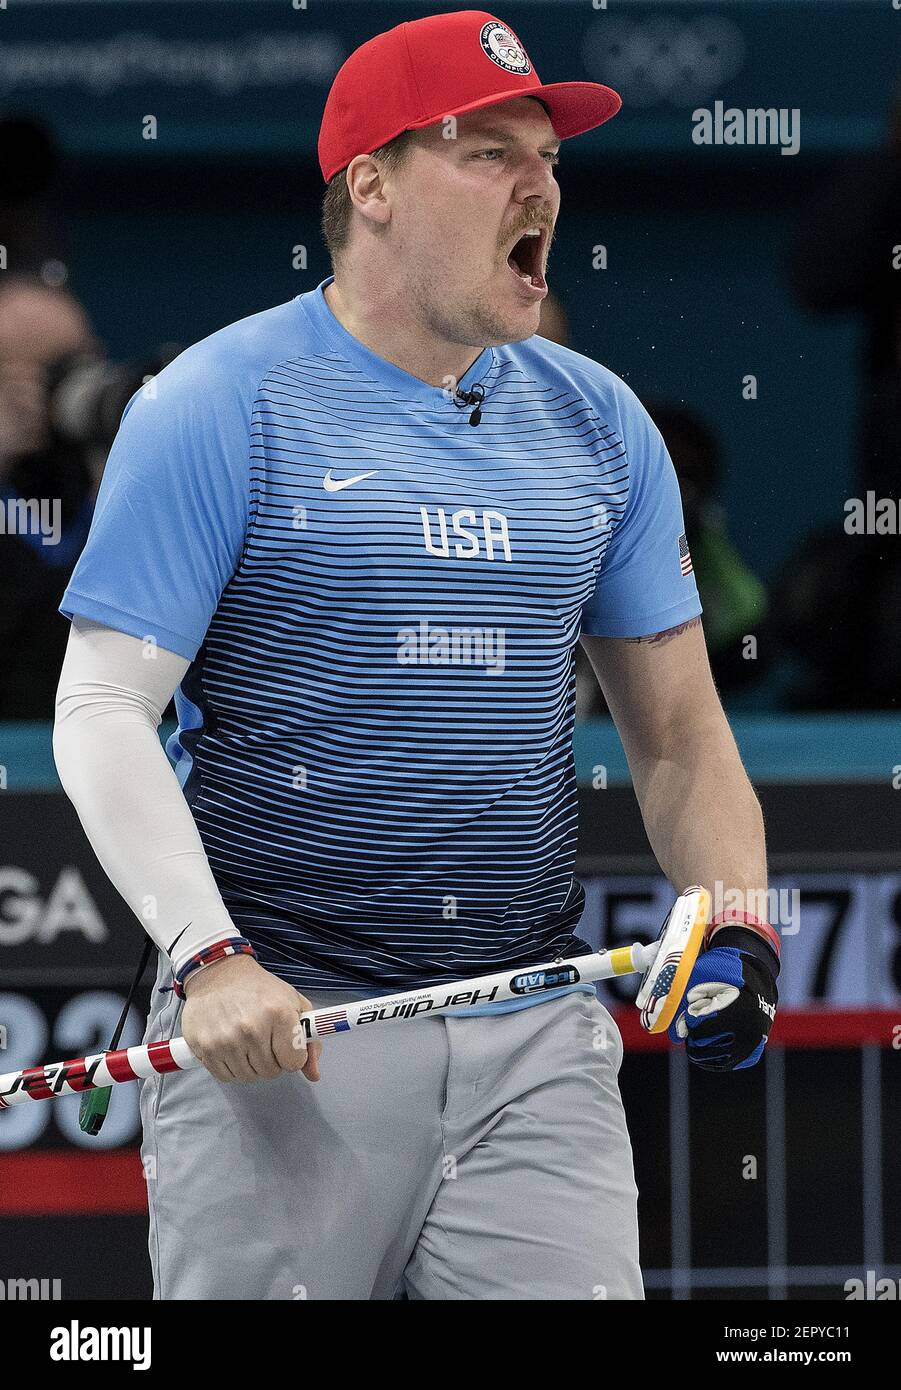 Team USA's Matt Hamilton during a 10-7 win against Sweden during the gold-medal match on Saturday, Feb. 24, 2018, at the Pyeongchang Winter Olympics' Gangneung Curling Centre. (Photo by Carlos Gonzalez/Minneapolis Star Tribune/TNS/Sipa USA) Stock Photo